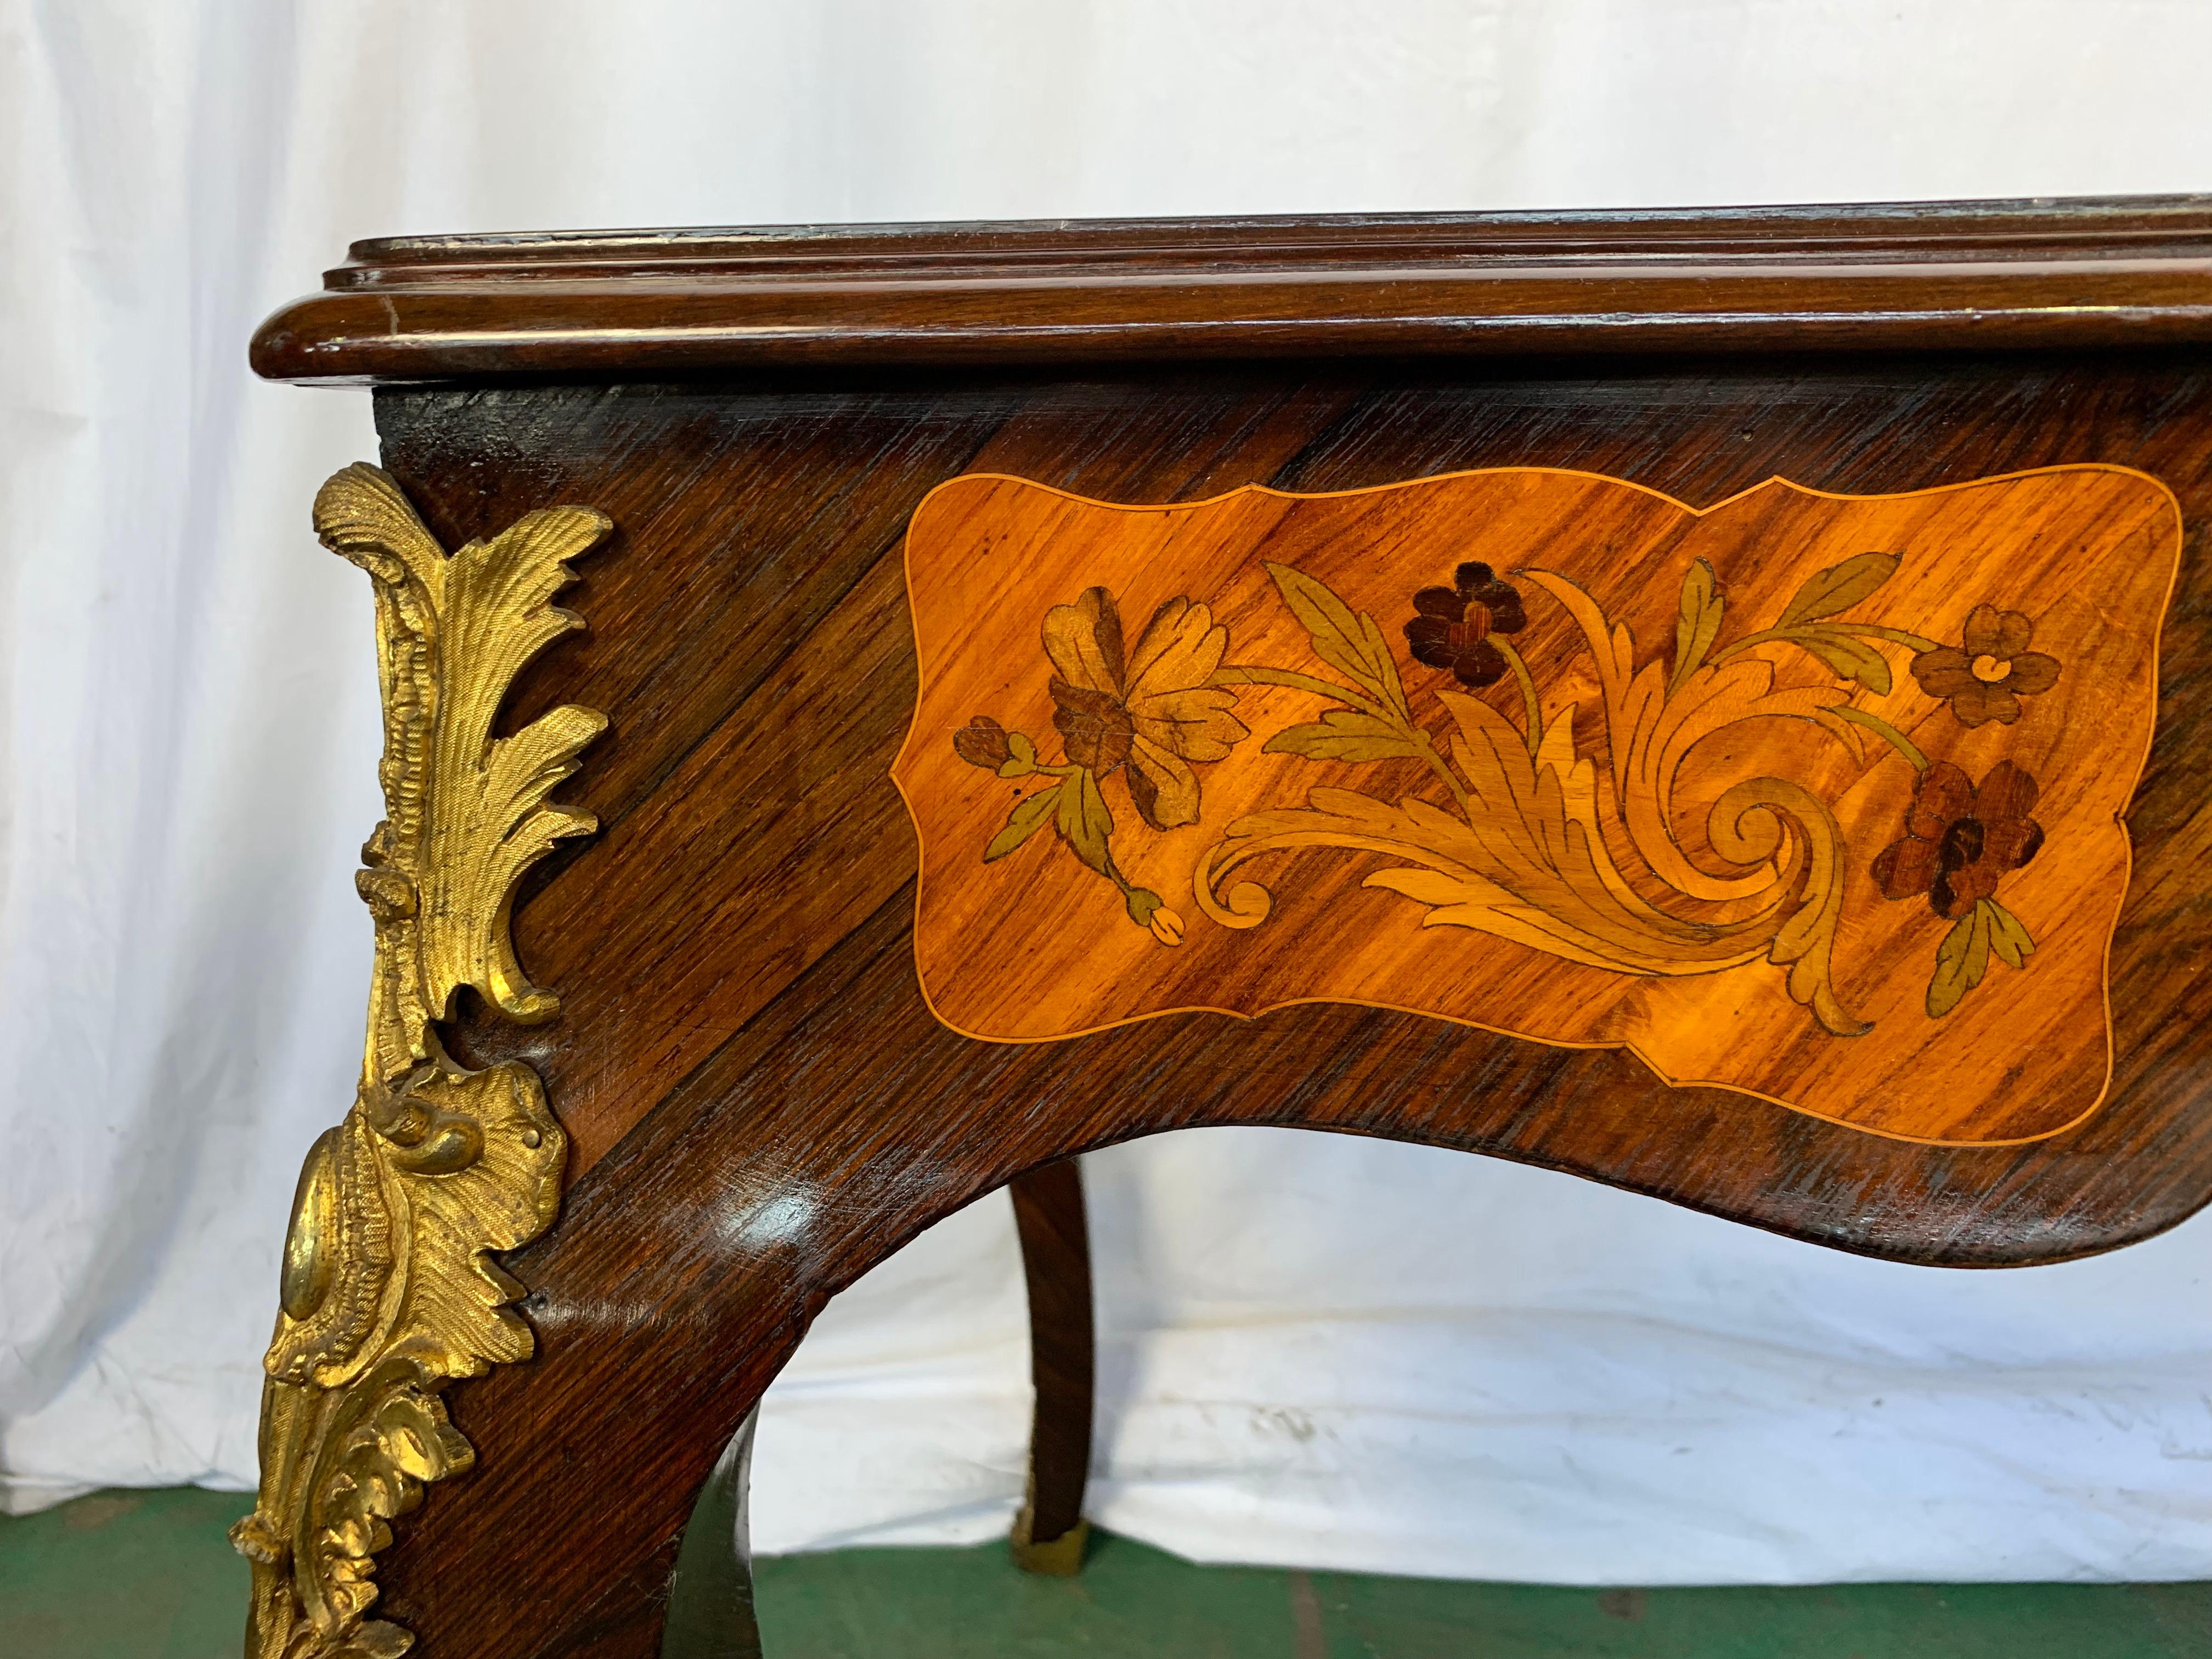 A fine 19th century French Pollard walnut marquetry and ormolu centre table. The ornate top inlaid in fruitwood with musical trophies. Supported on cabriole legs.